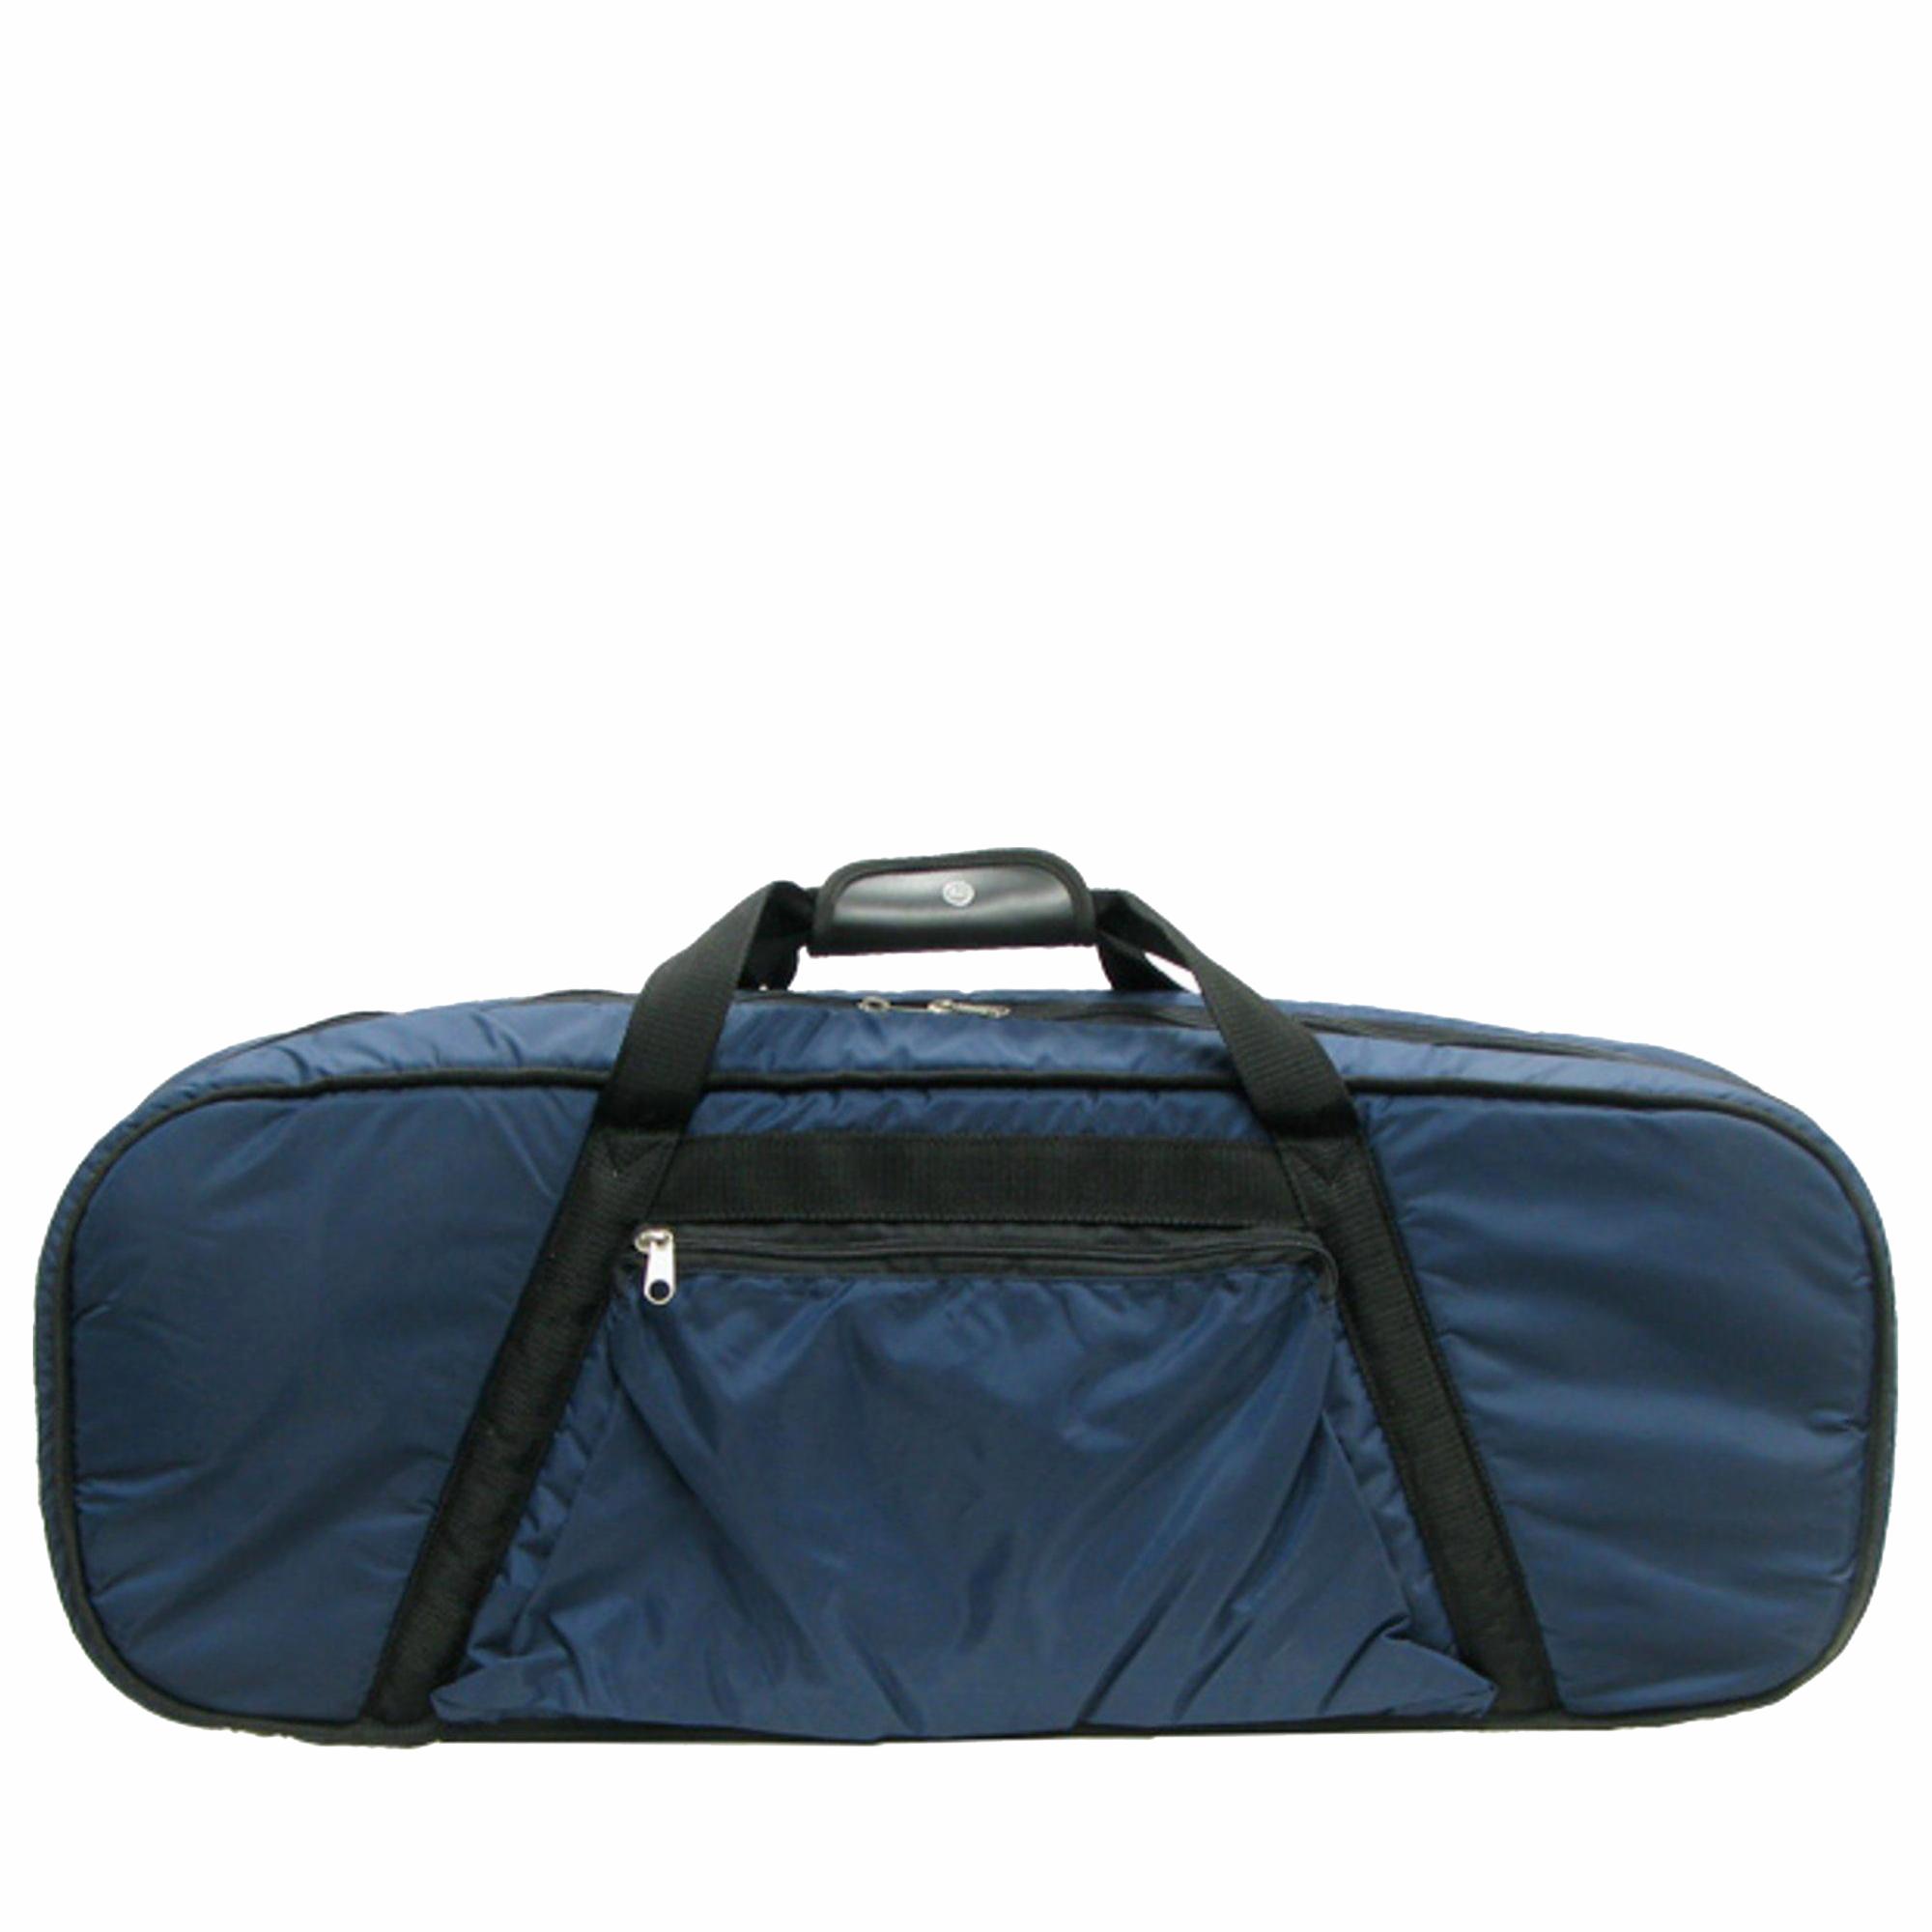 Blue fits 1002 cases